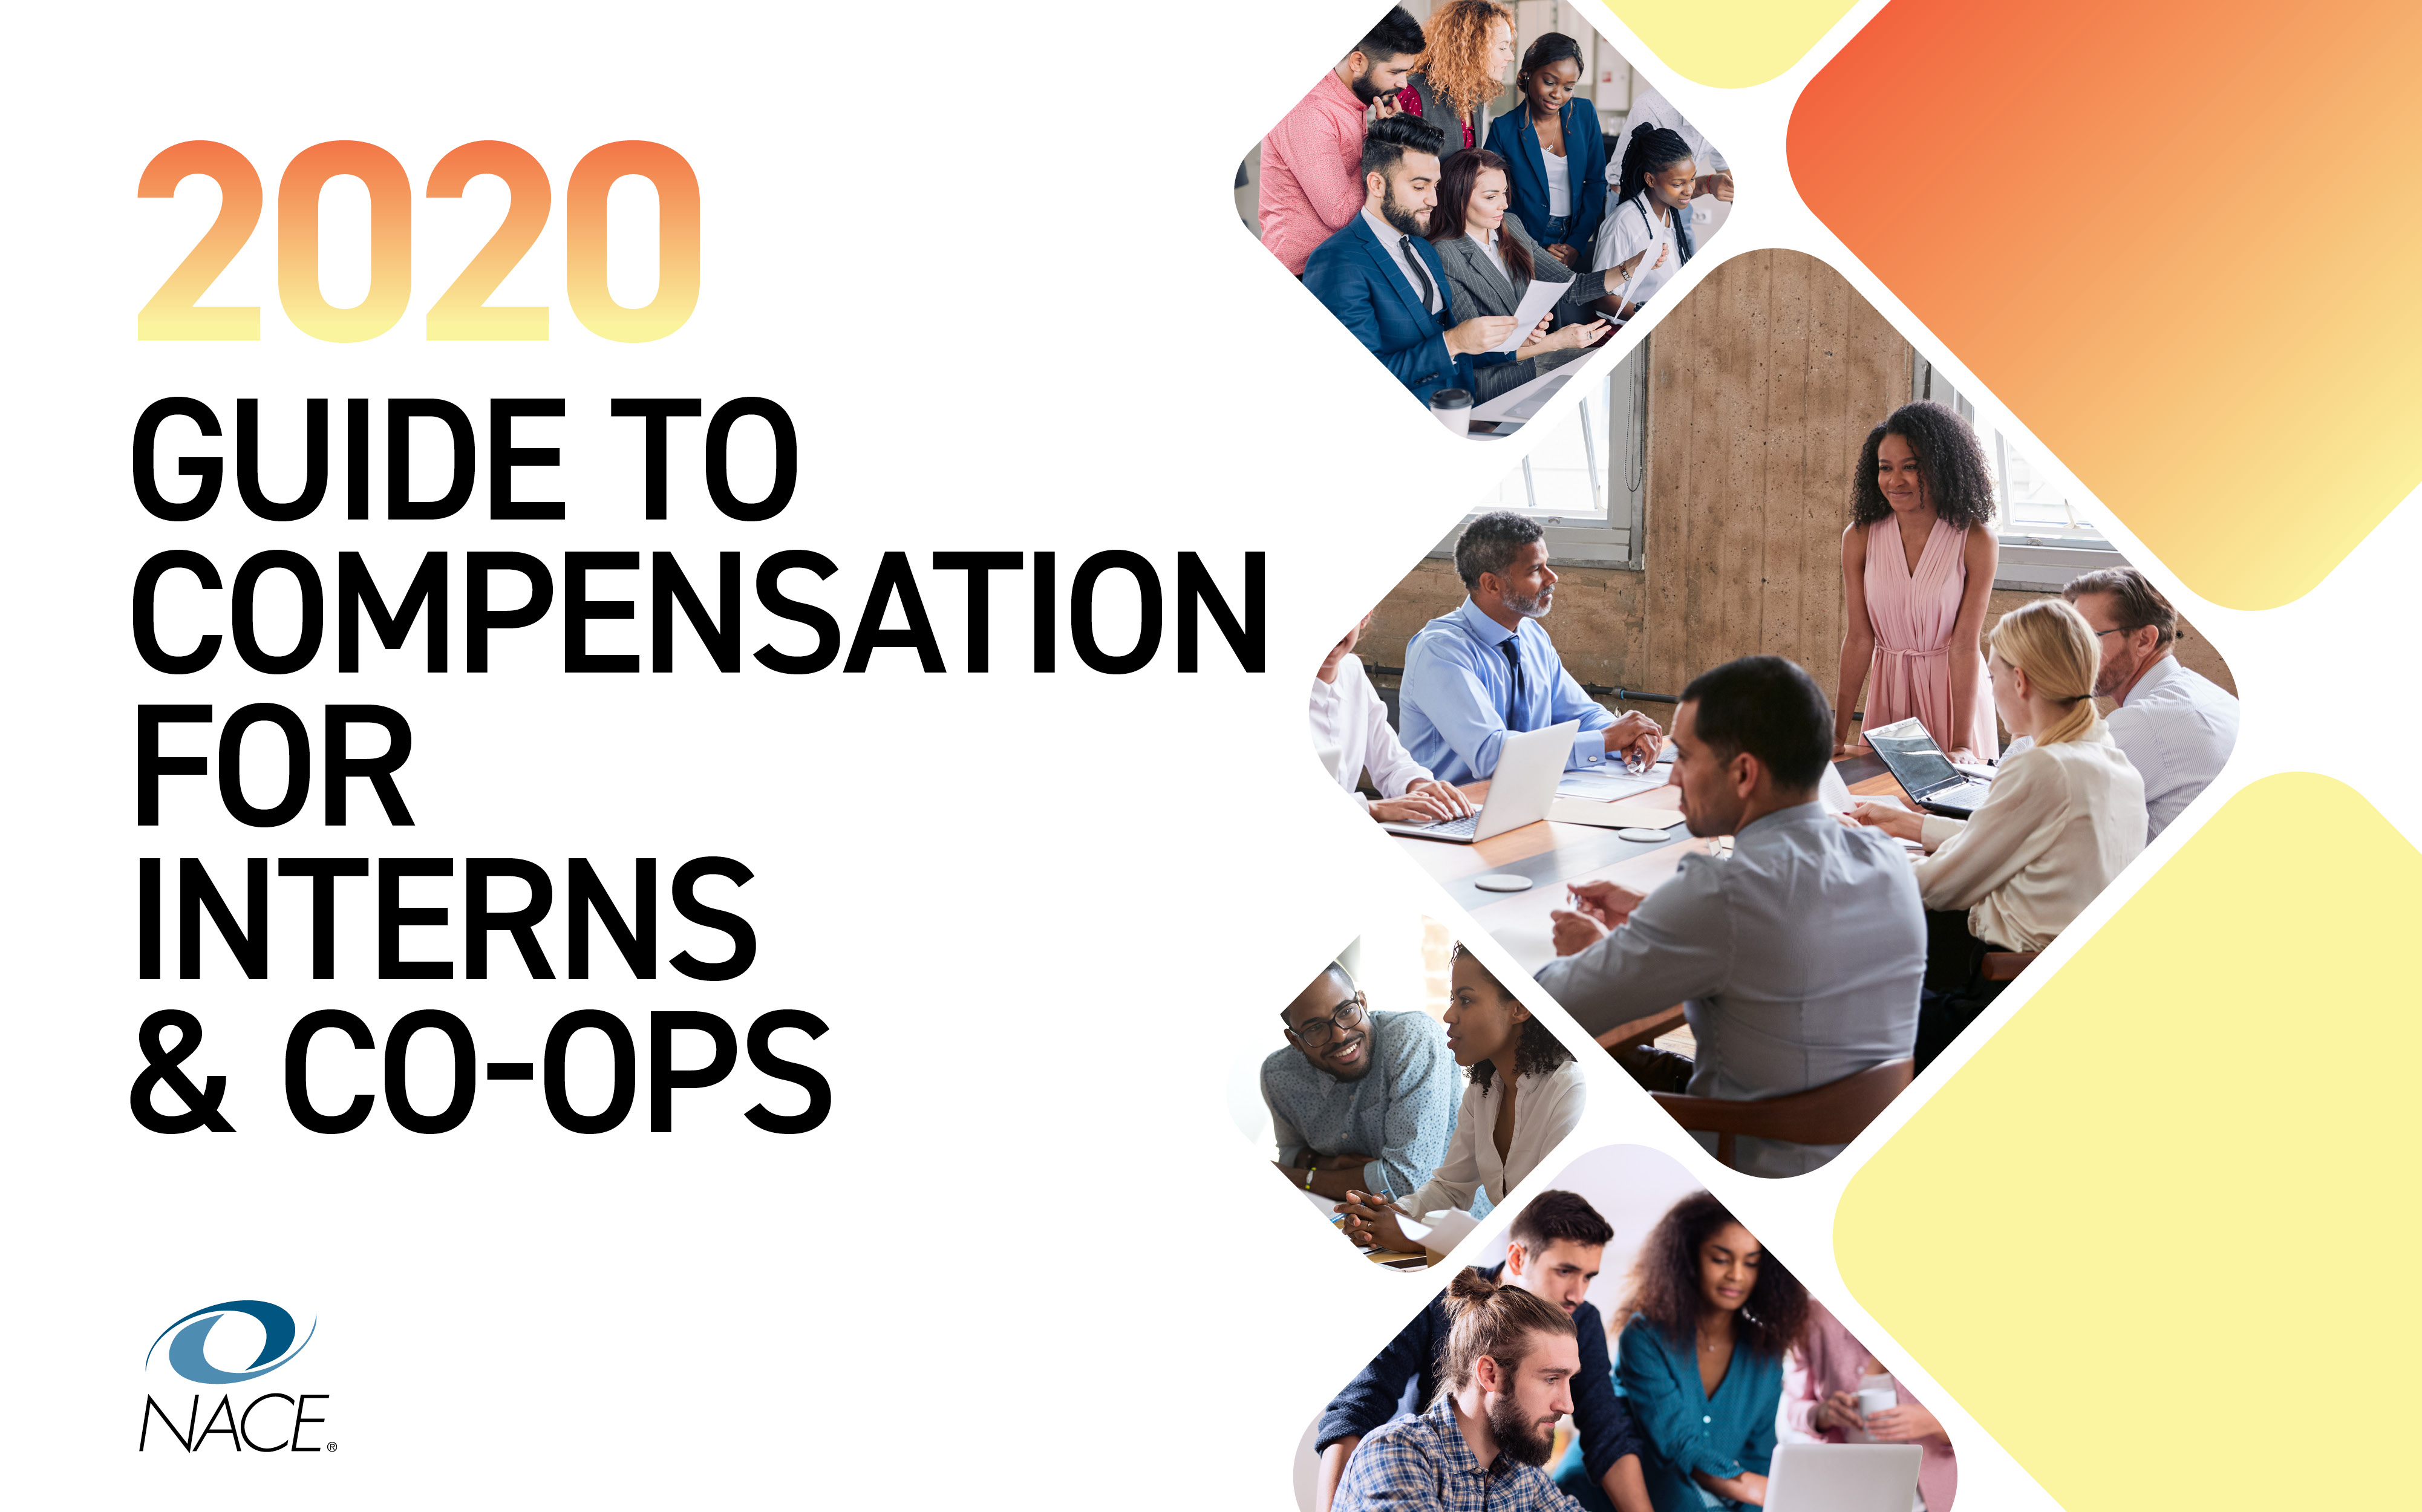 Guide to Compensation for Interns & Co-ops 2020